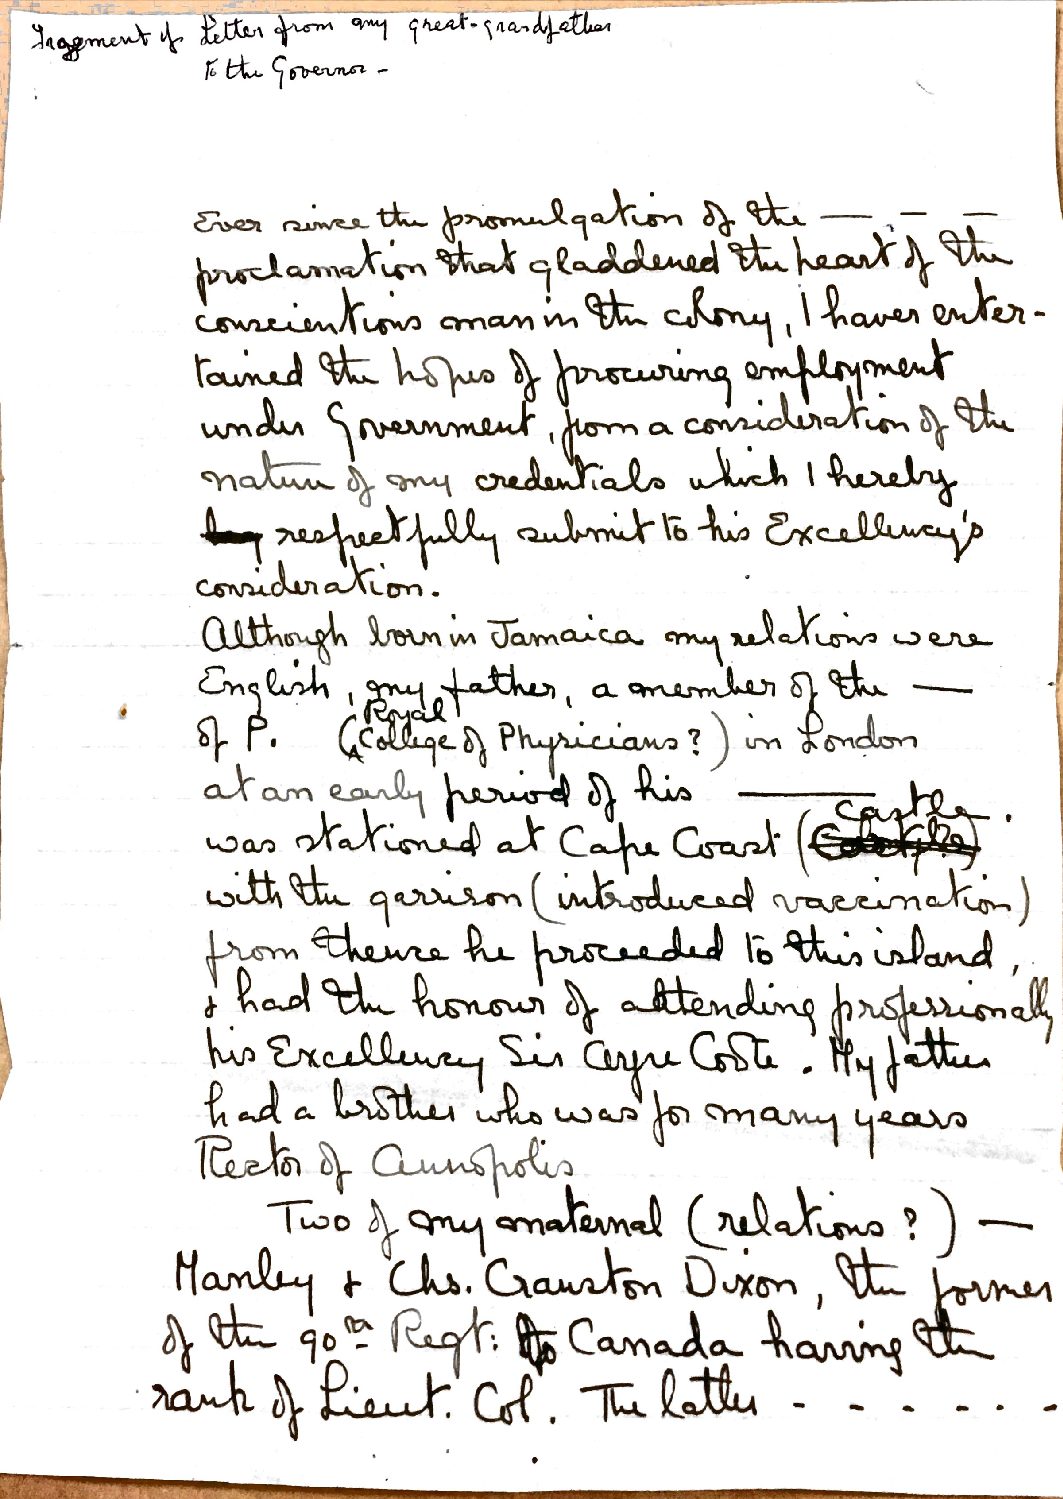 Letter Fragment of Cyrus Francis Perkins to Governor